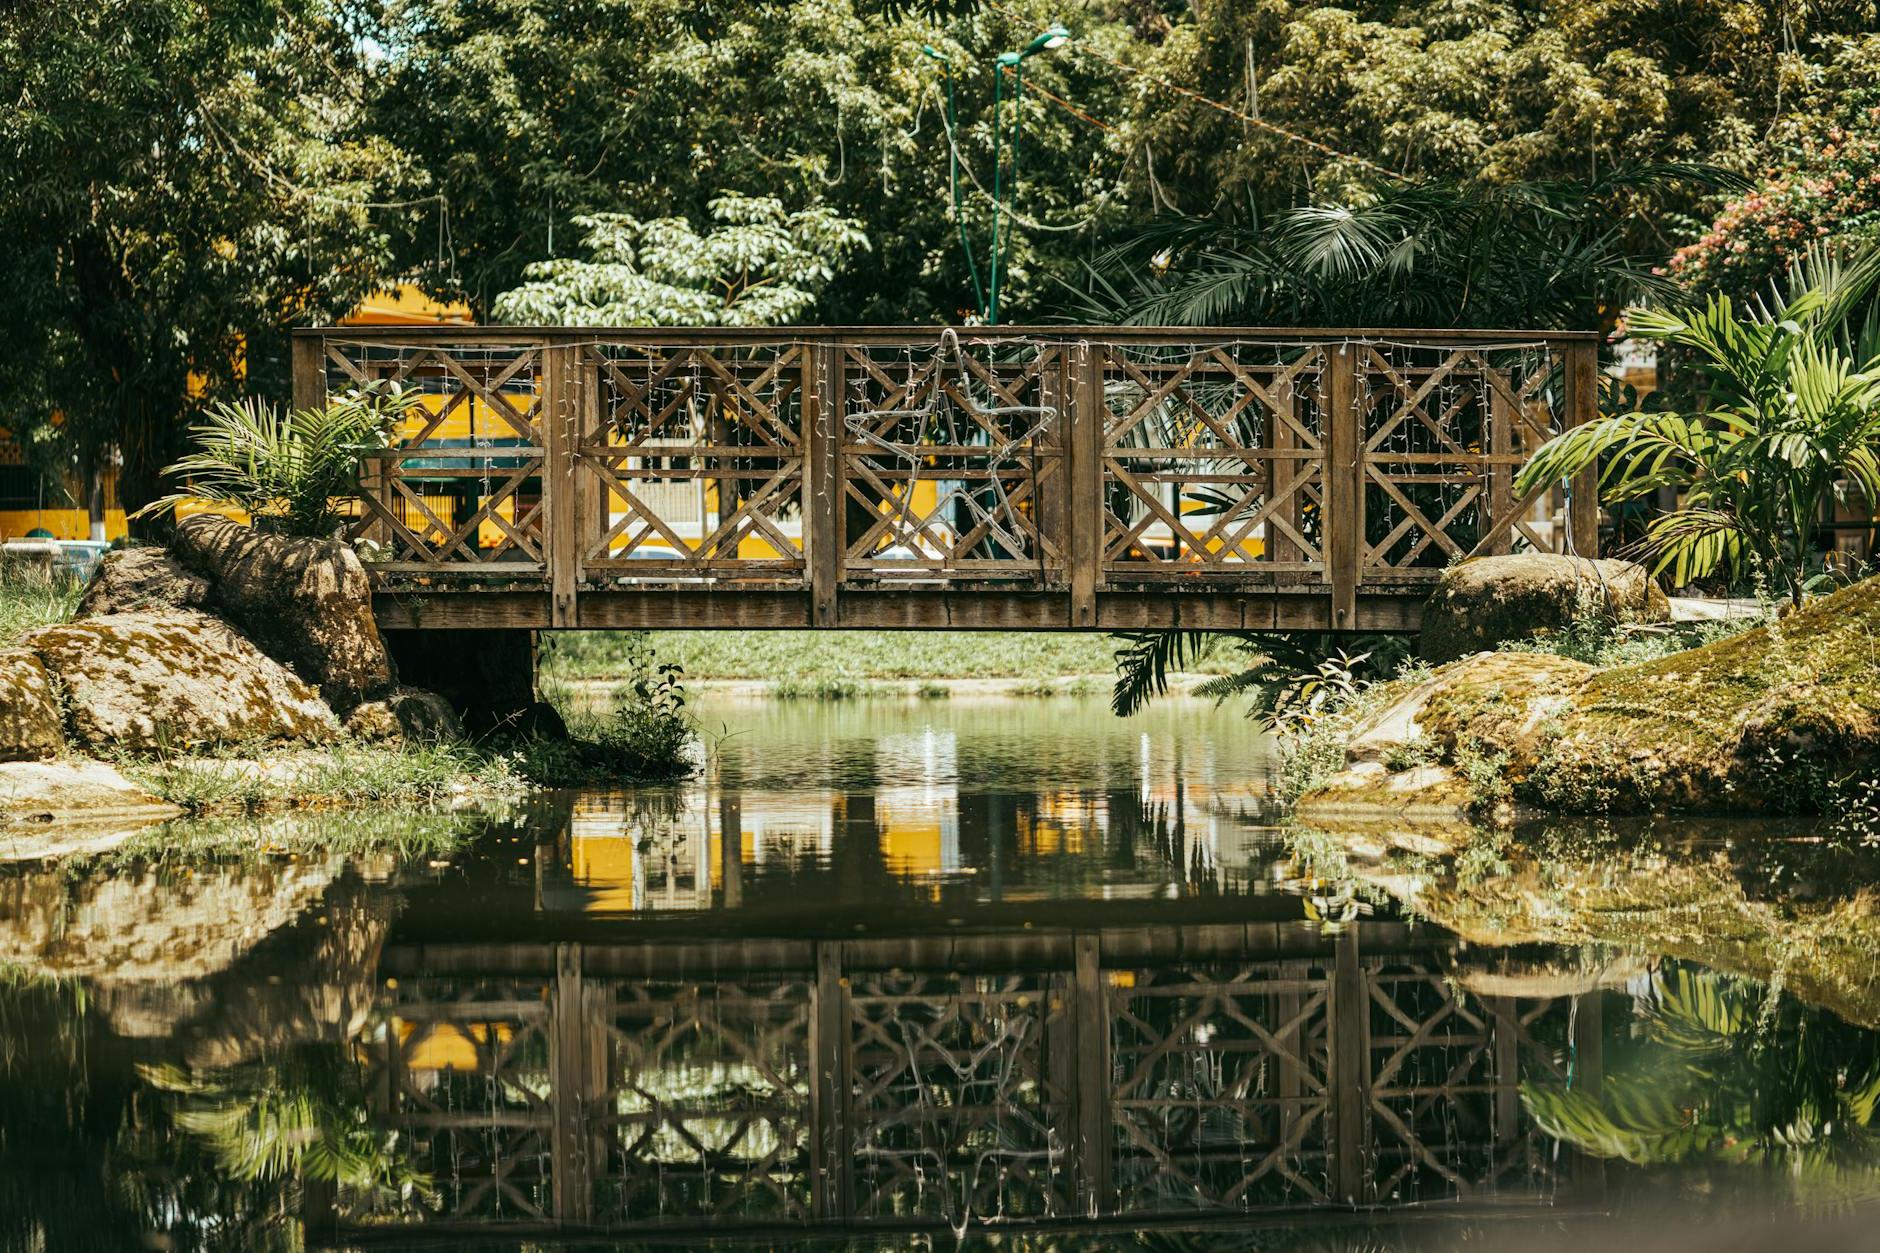 A wooden bridge over a pond with trees and plants